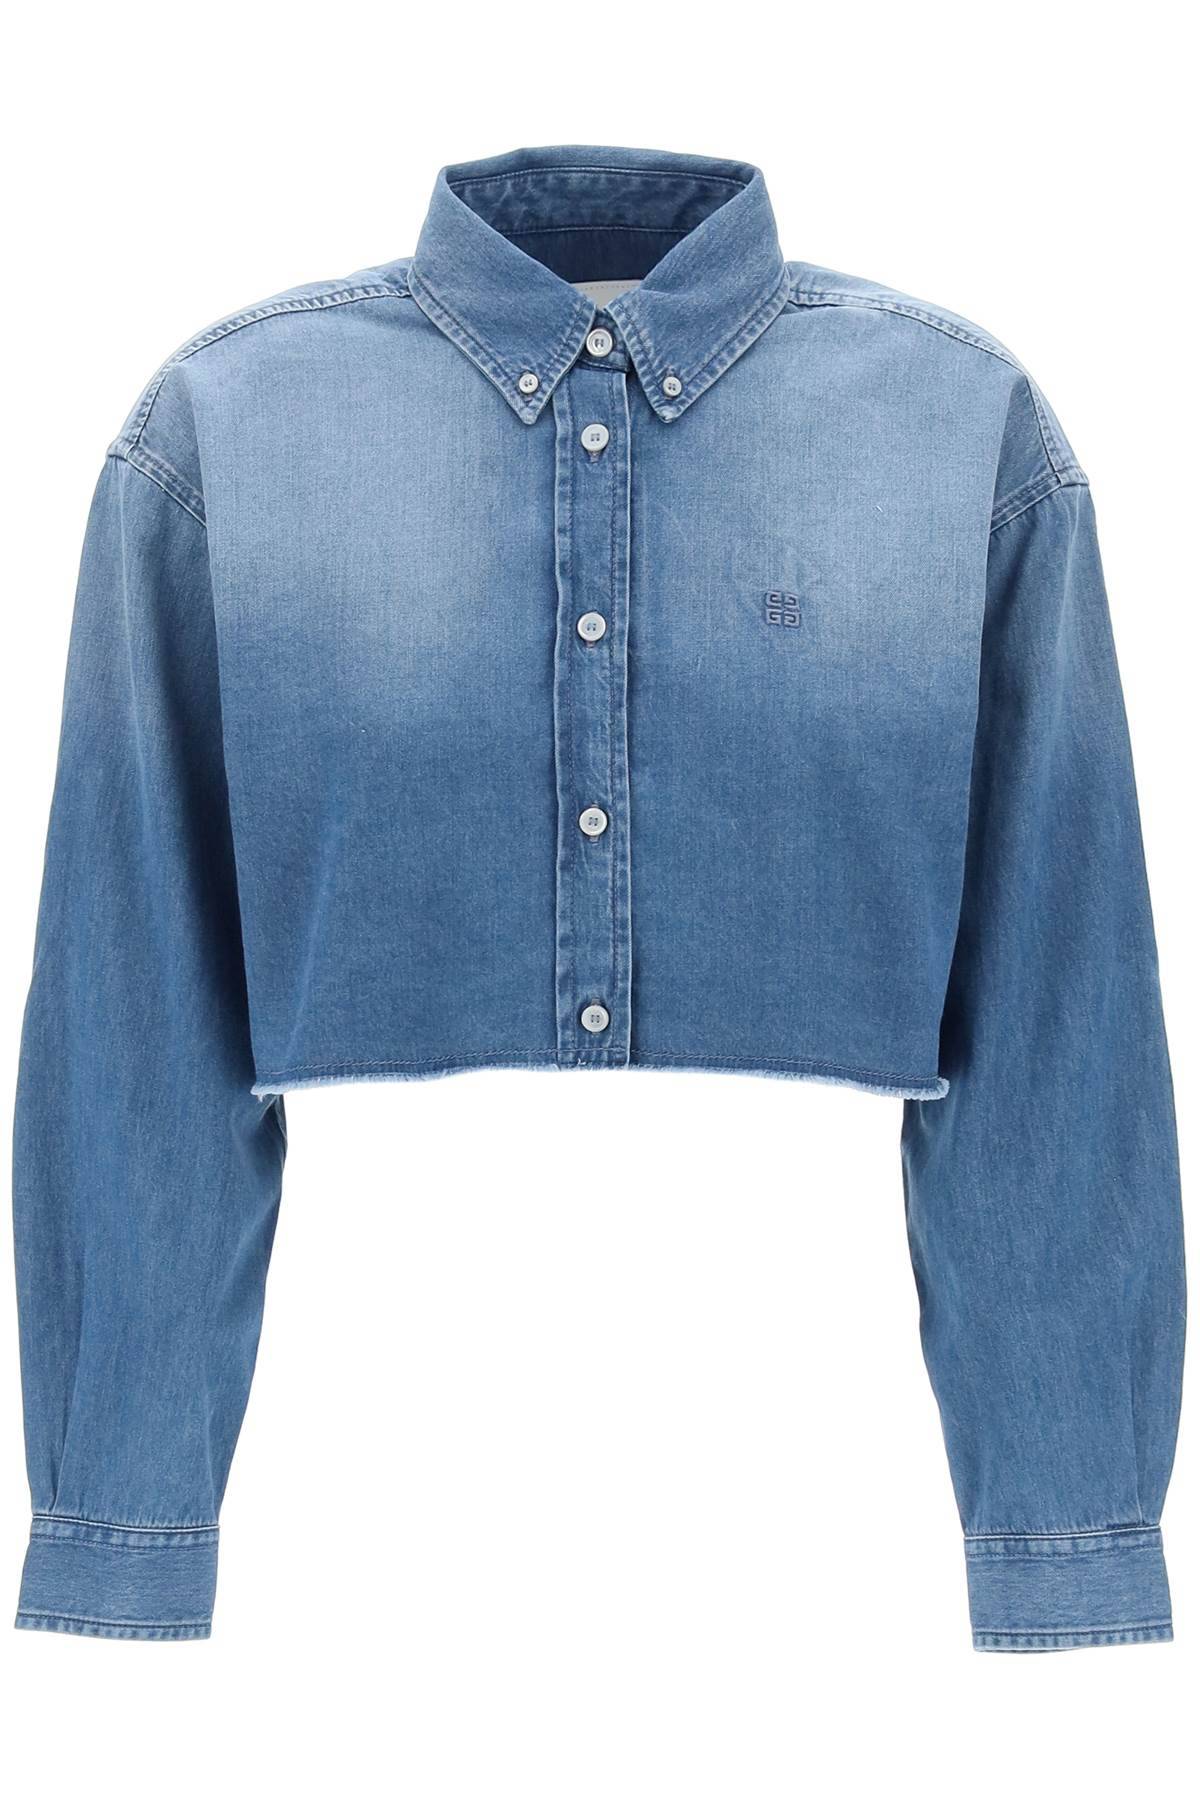 Givenchy GIVENCHY denim cropped shirt for women